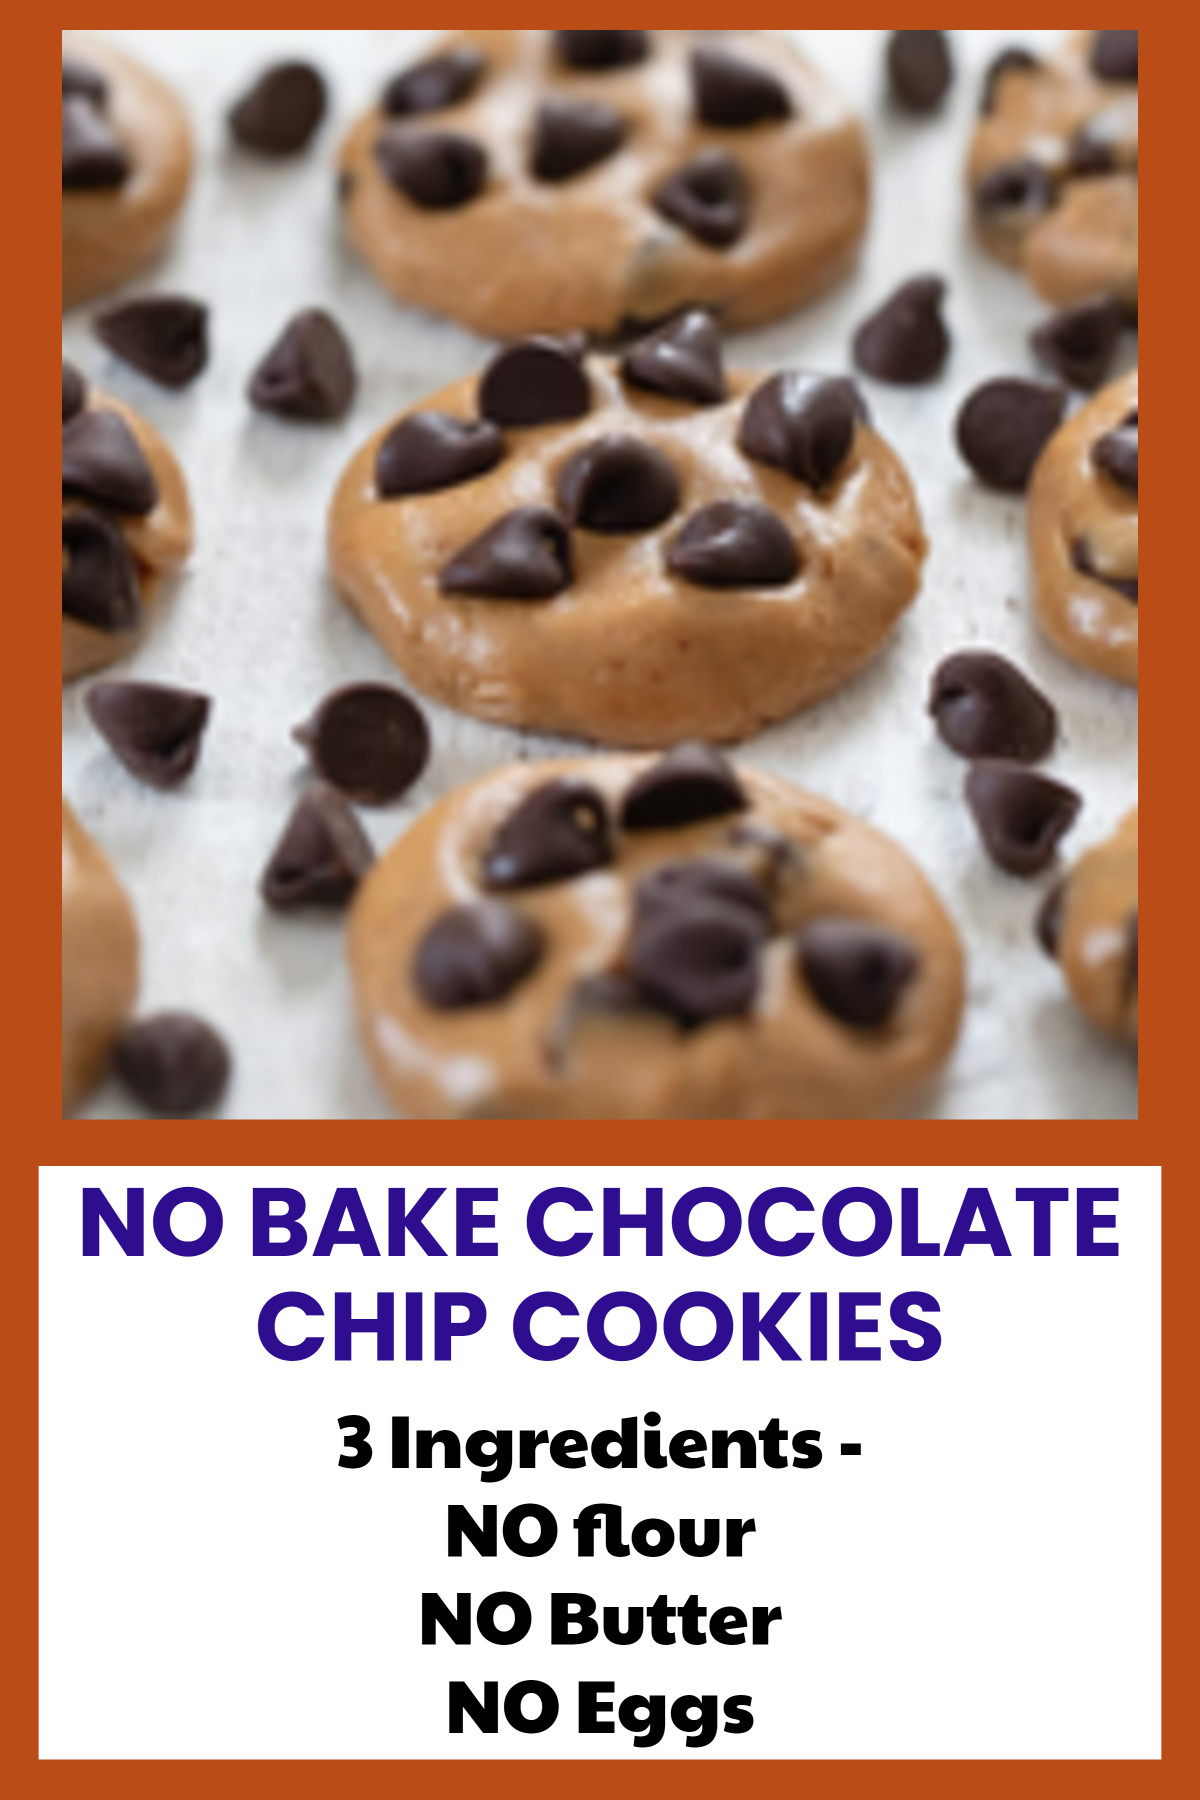 No Bake Chocolate Chip Cookies - 3 ingredients, no flour, no butter, no eggs